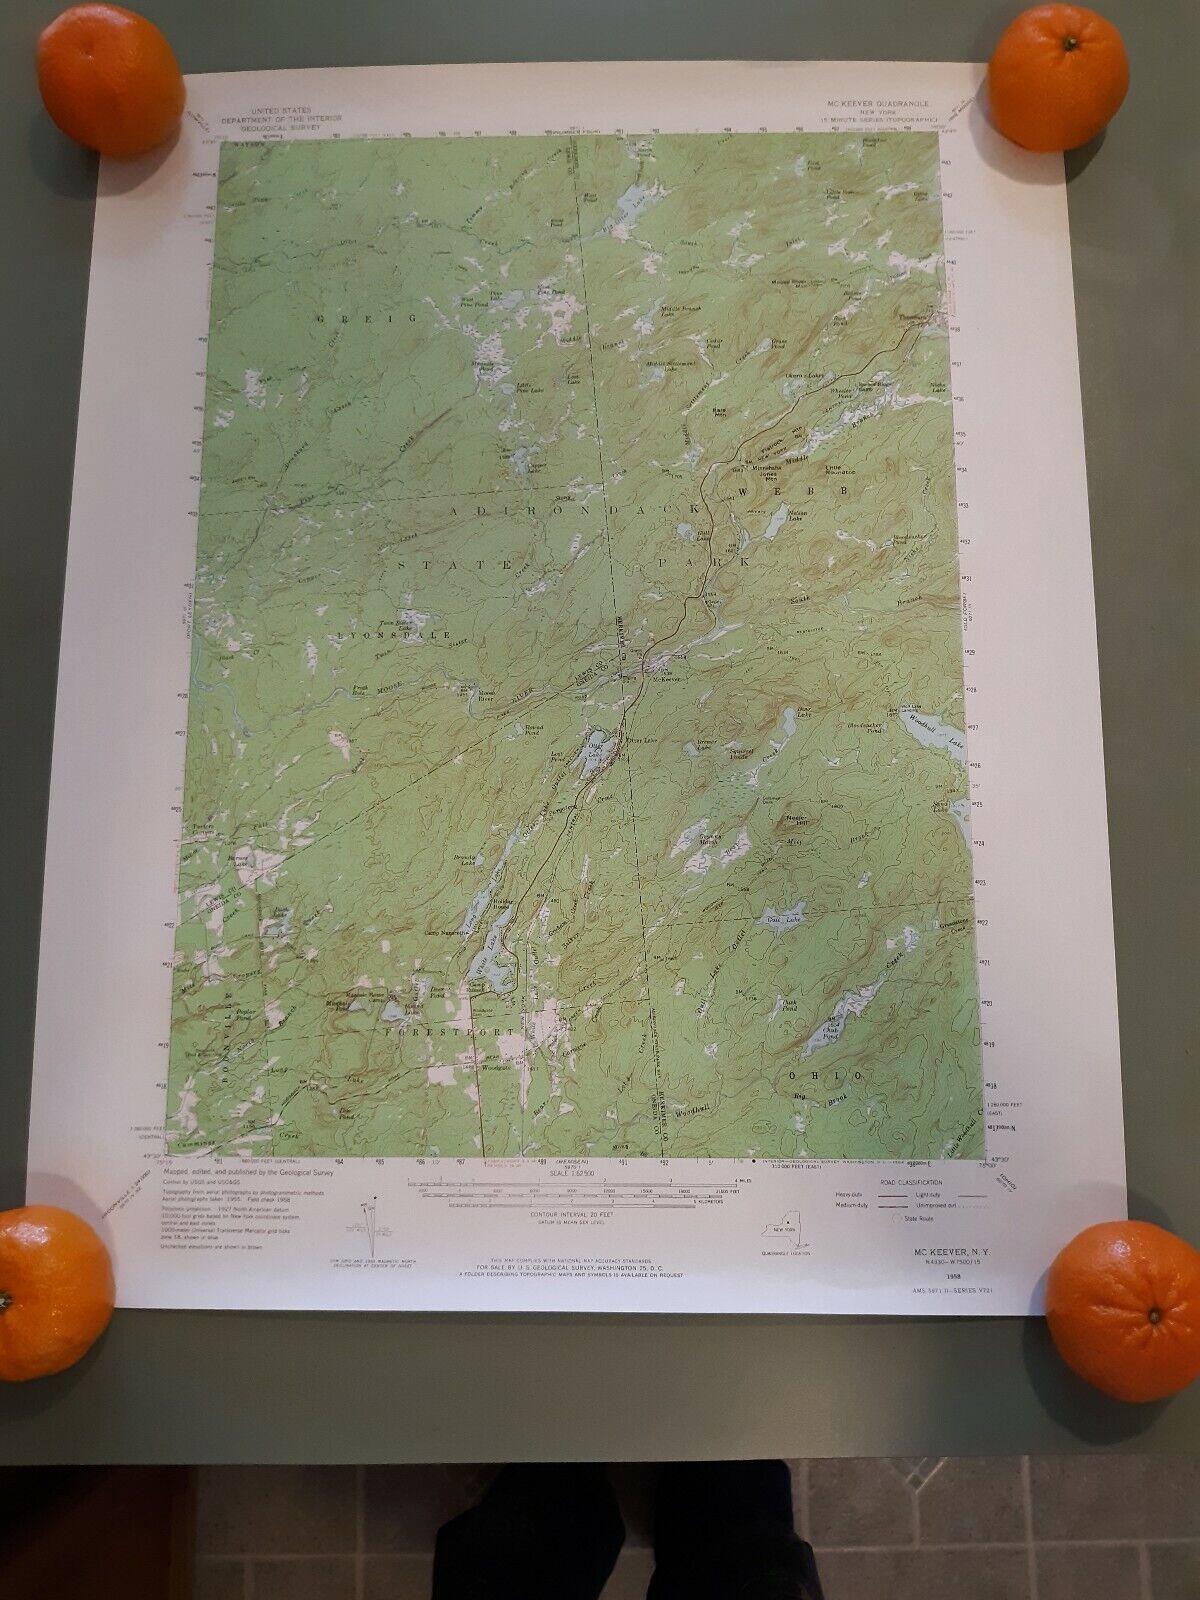 Adirondack State Park 1958 Mckeever, Ny Us Dept Of Interior Geological Survey...